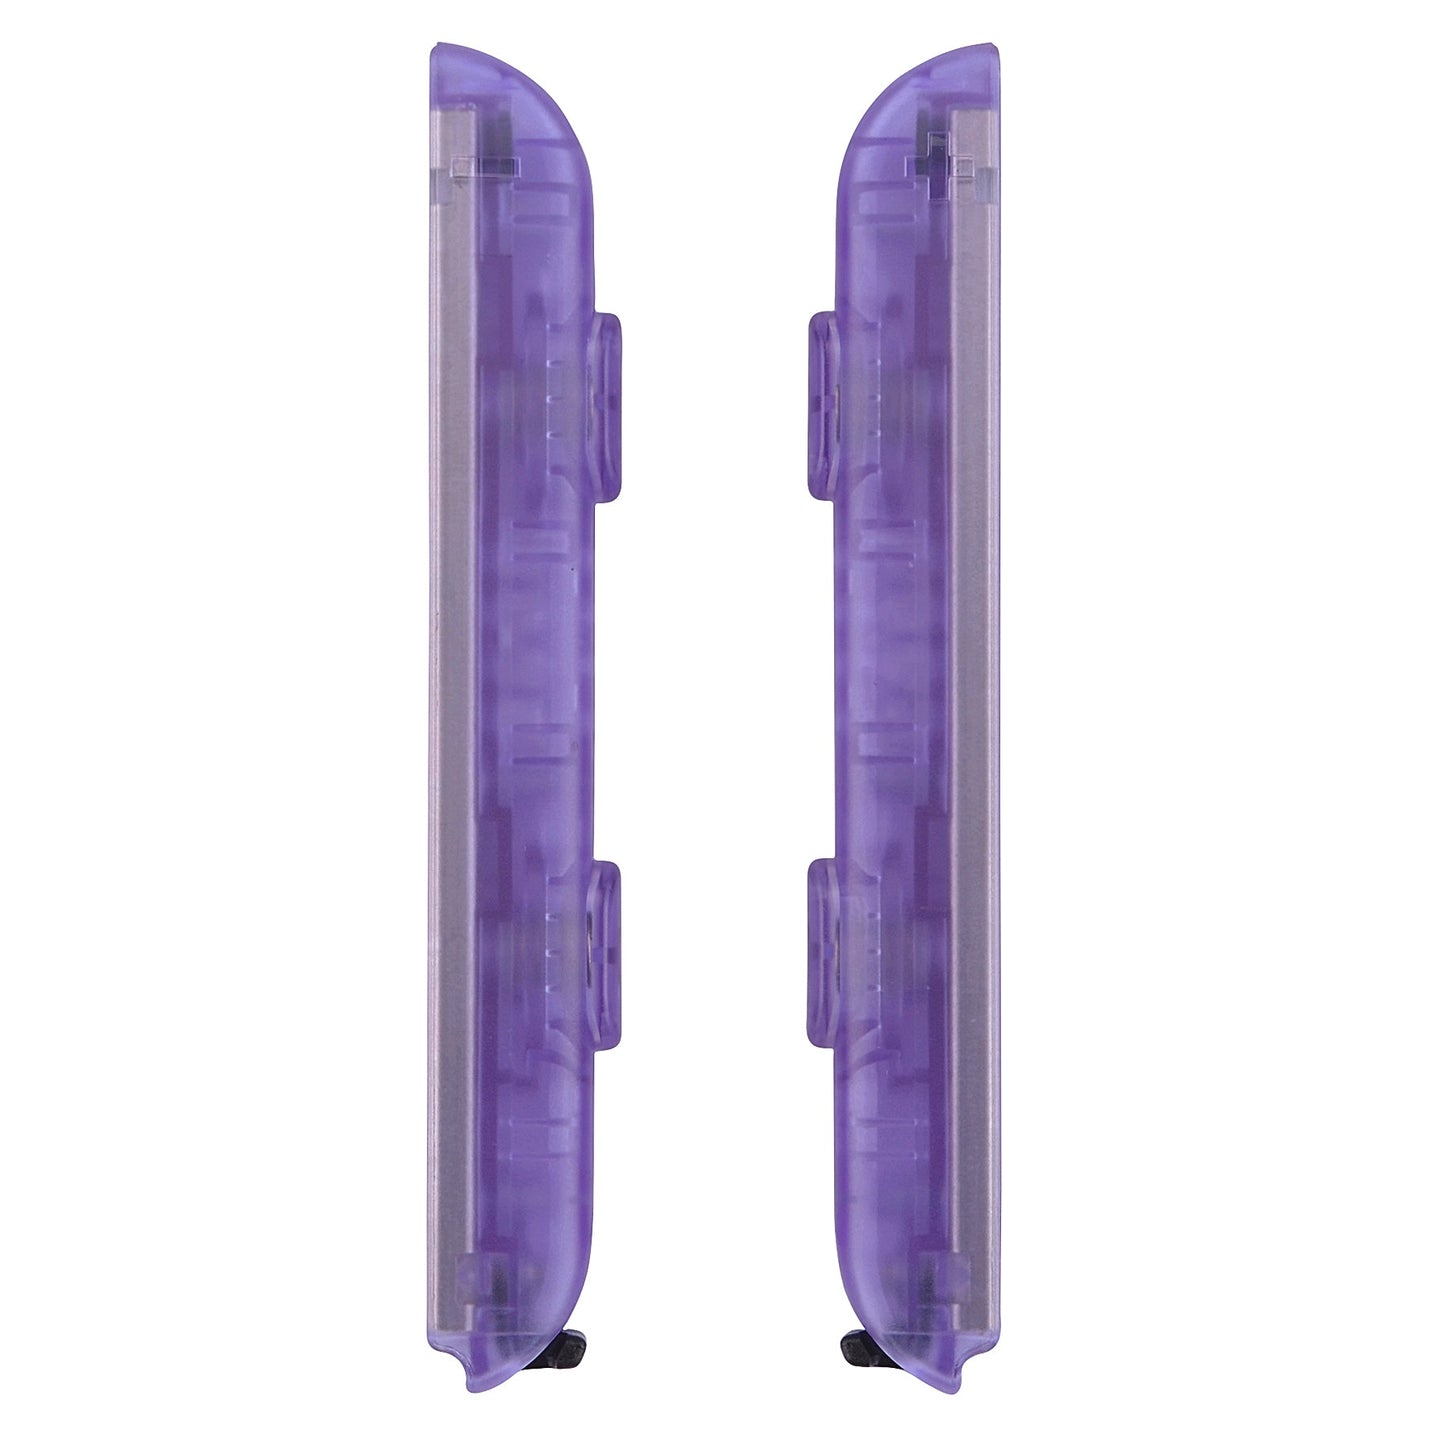 eXtremeRate Retail Clear Atomic Purple Replacement shell for Nintendo Switch Joycon Strap, Custom Joy-Con Wrist Strap Housing Buttons for Nintendo Switch - 2 Pack - UEM505